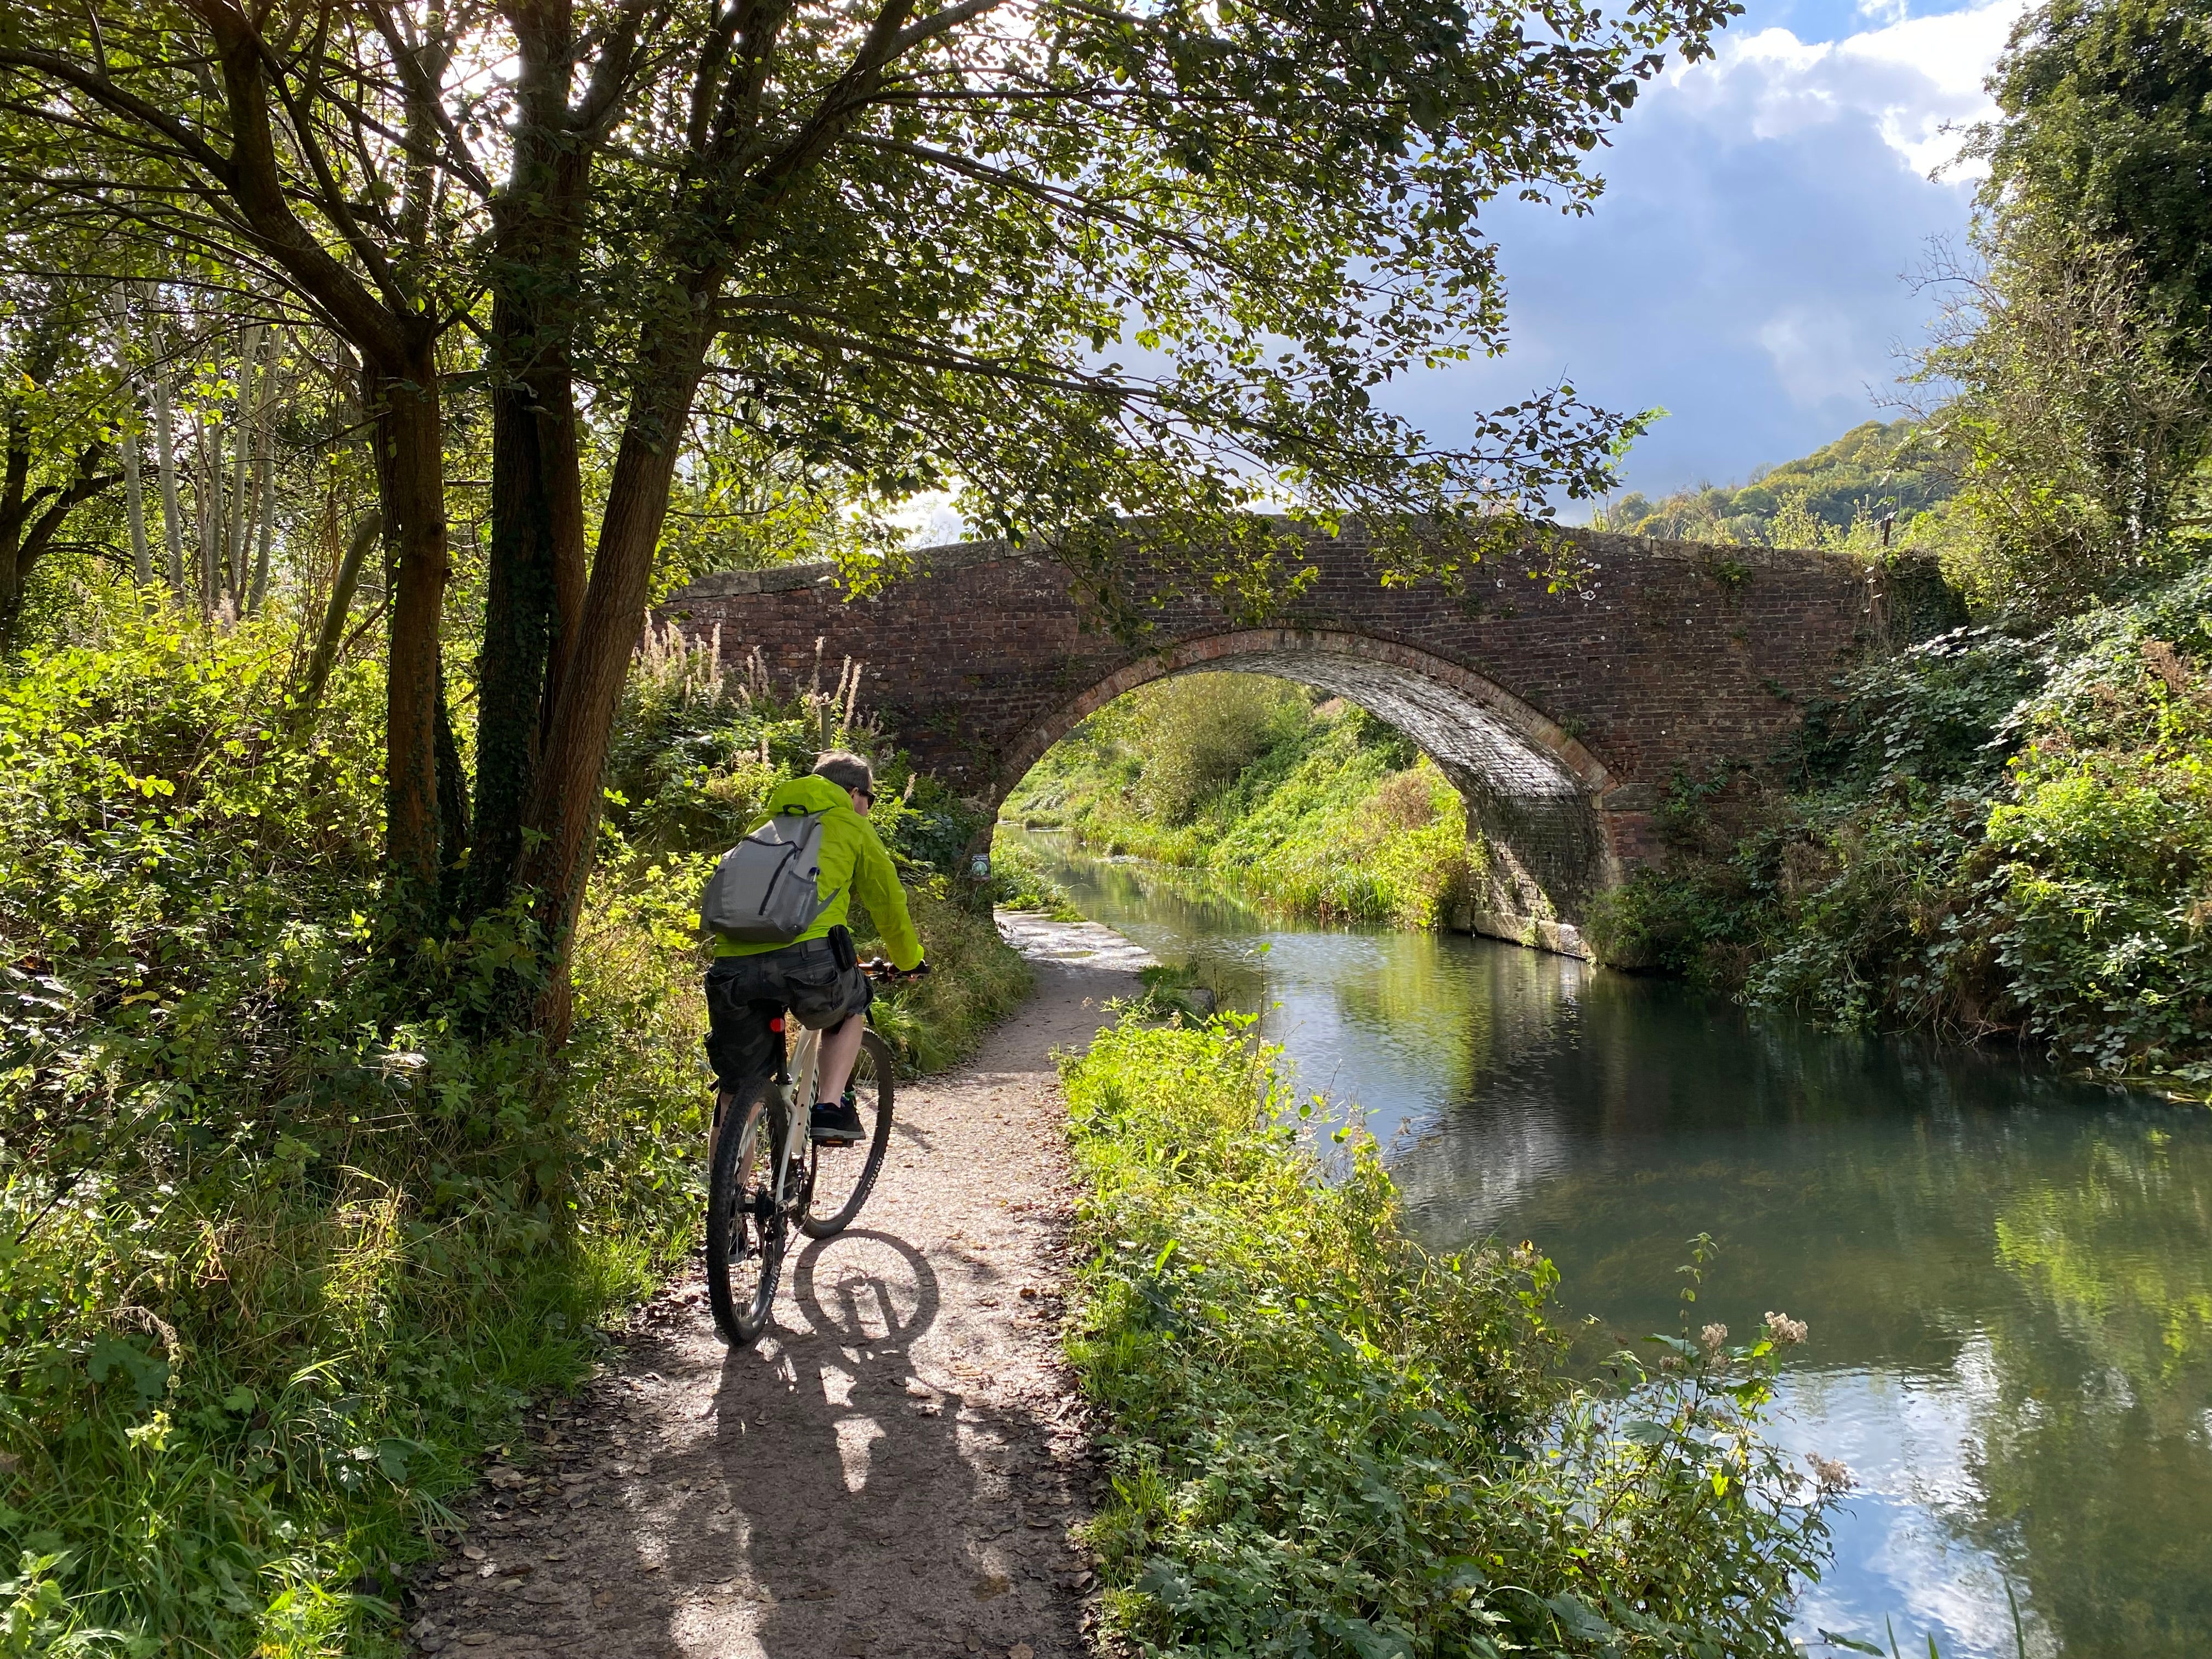 Pedal the Stroudwater Navigation or the Thames and Severn Canal for a behind-the-scenes tour of the Cotswolds